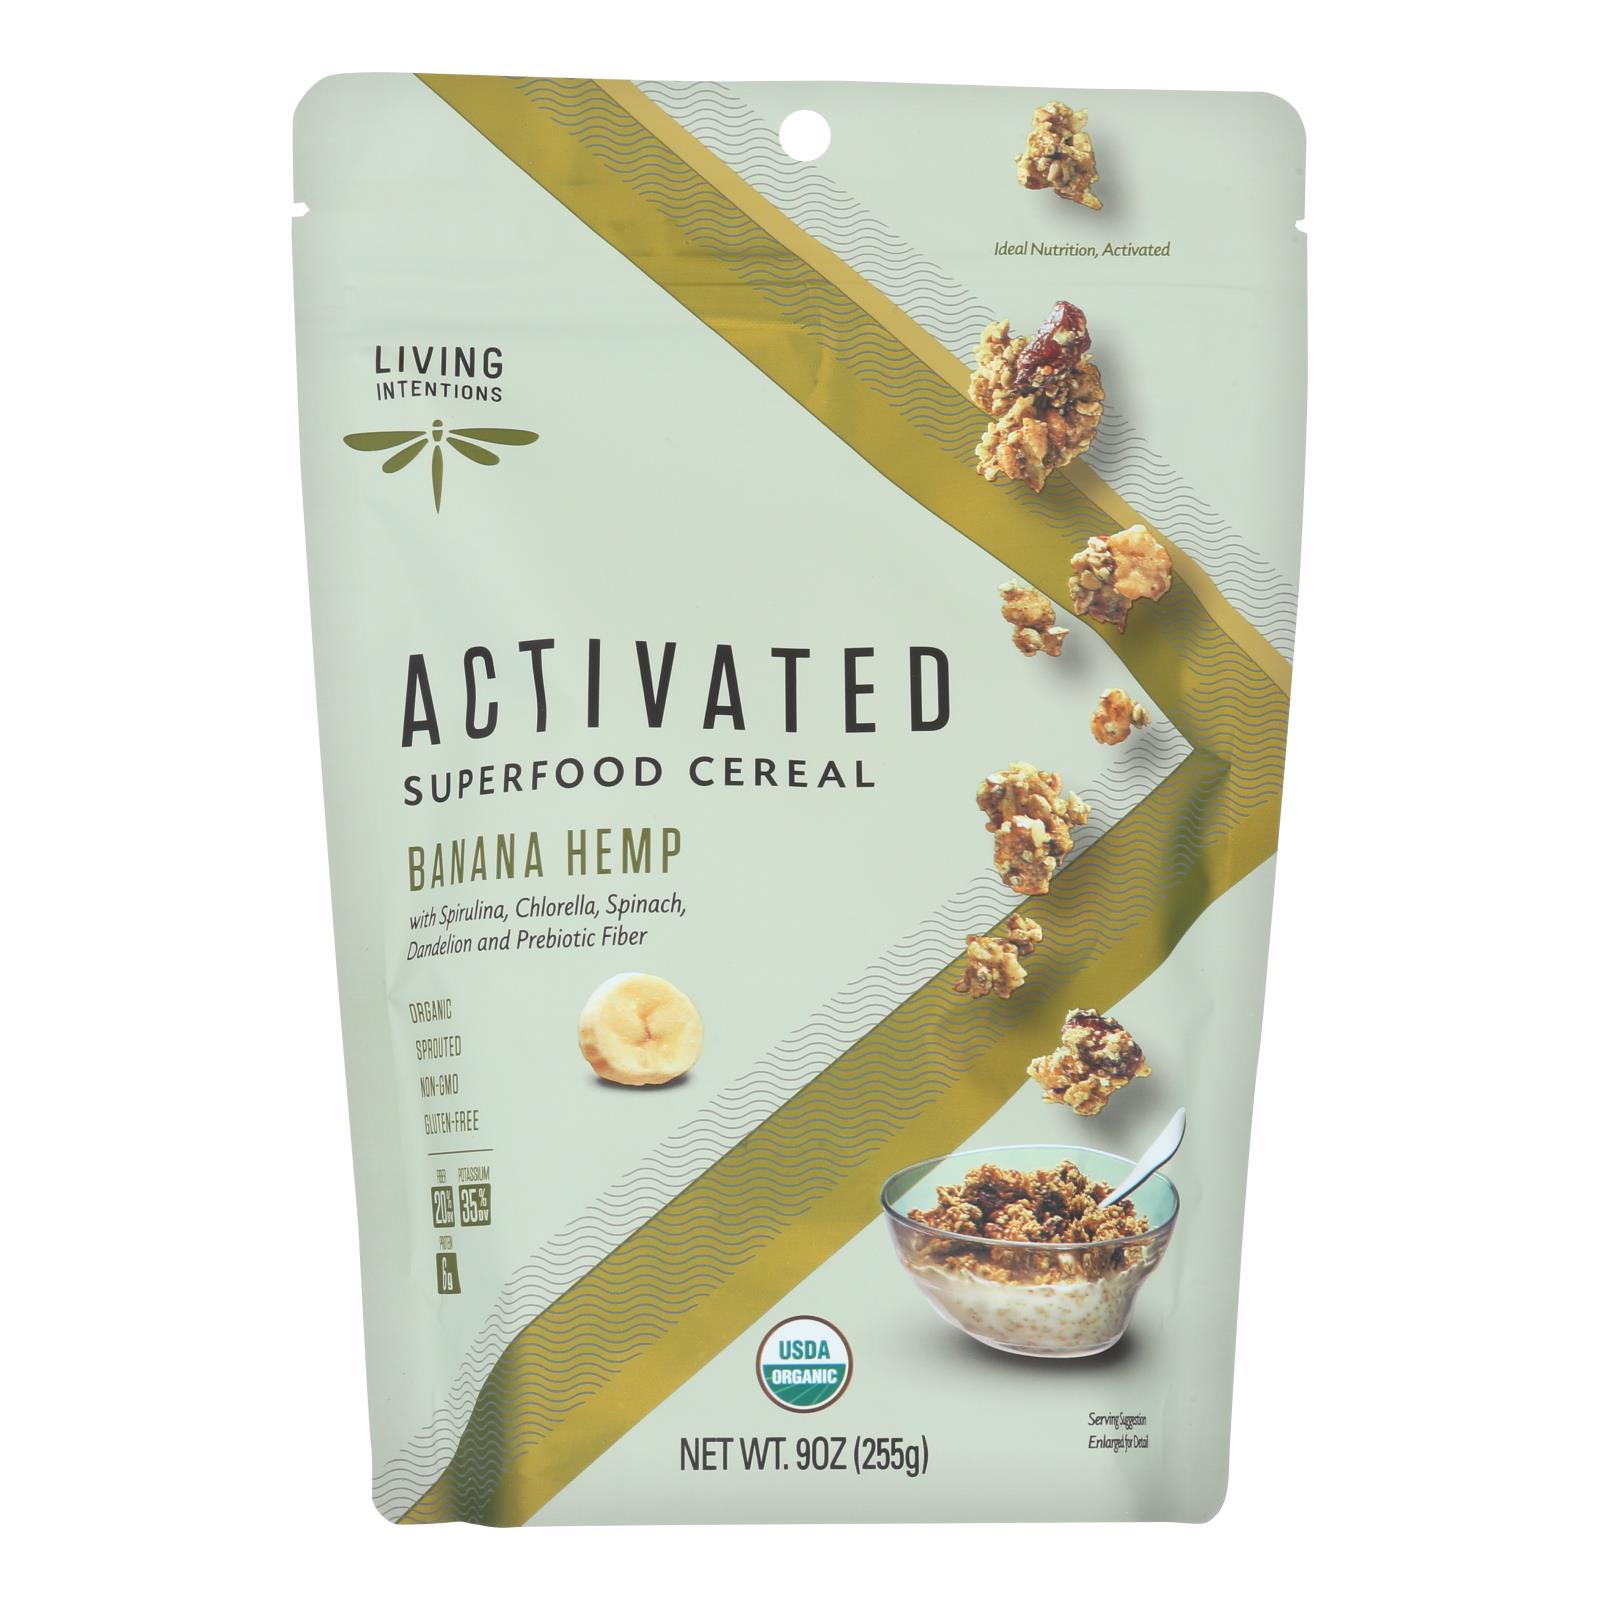 Living Intentions Activated Superfood Cereal - 6개 묶음상품 - 9 OZ